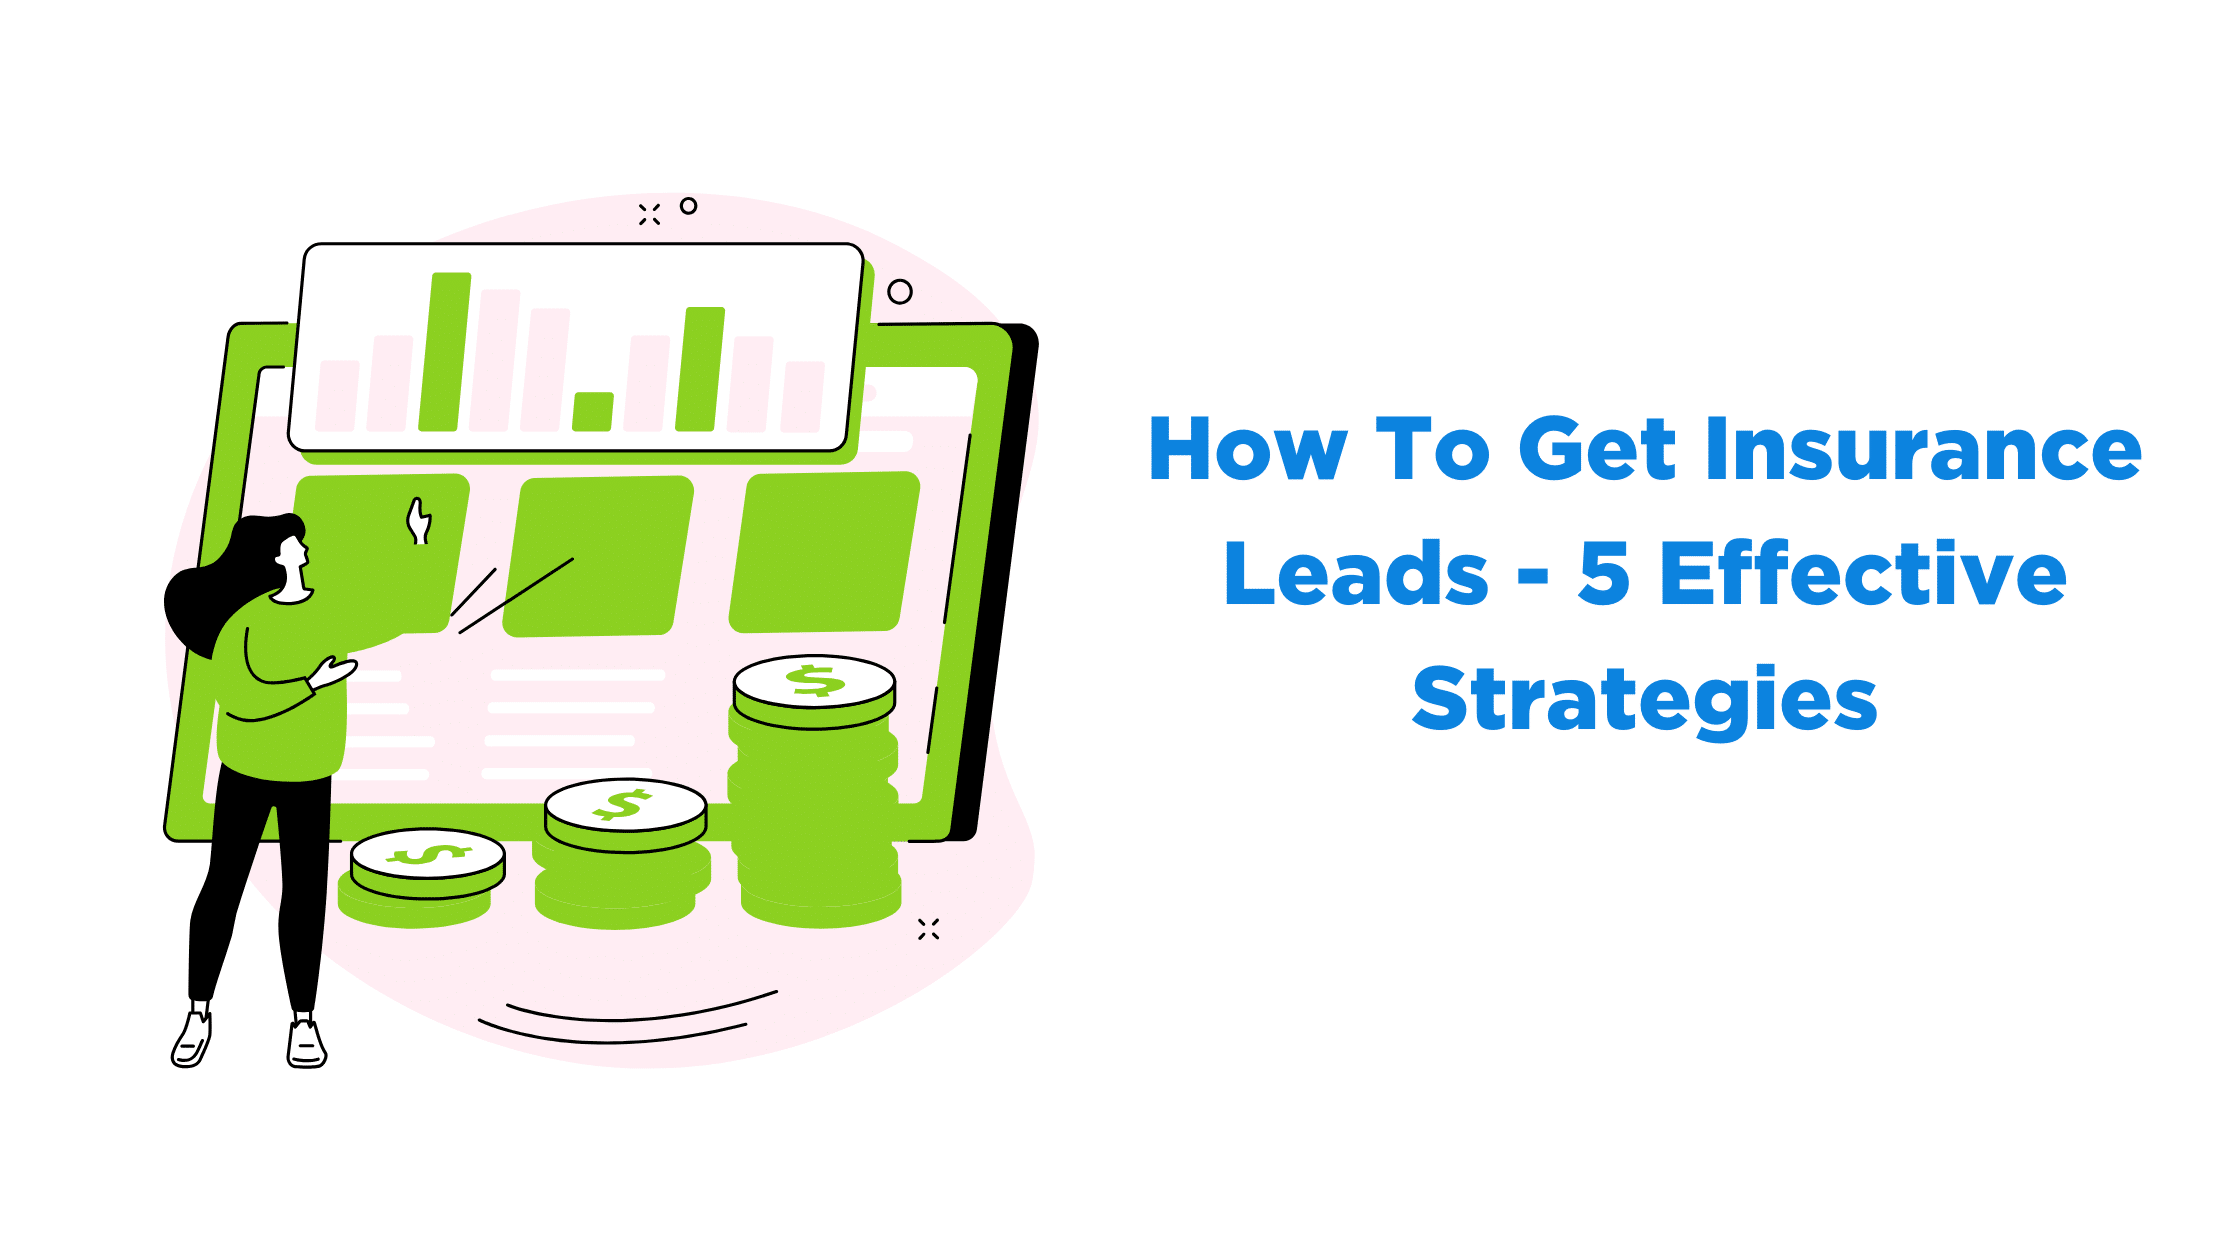 How To Get Insurance Leads - 5 Effective Strategies